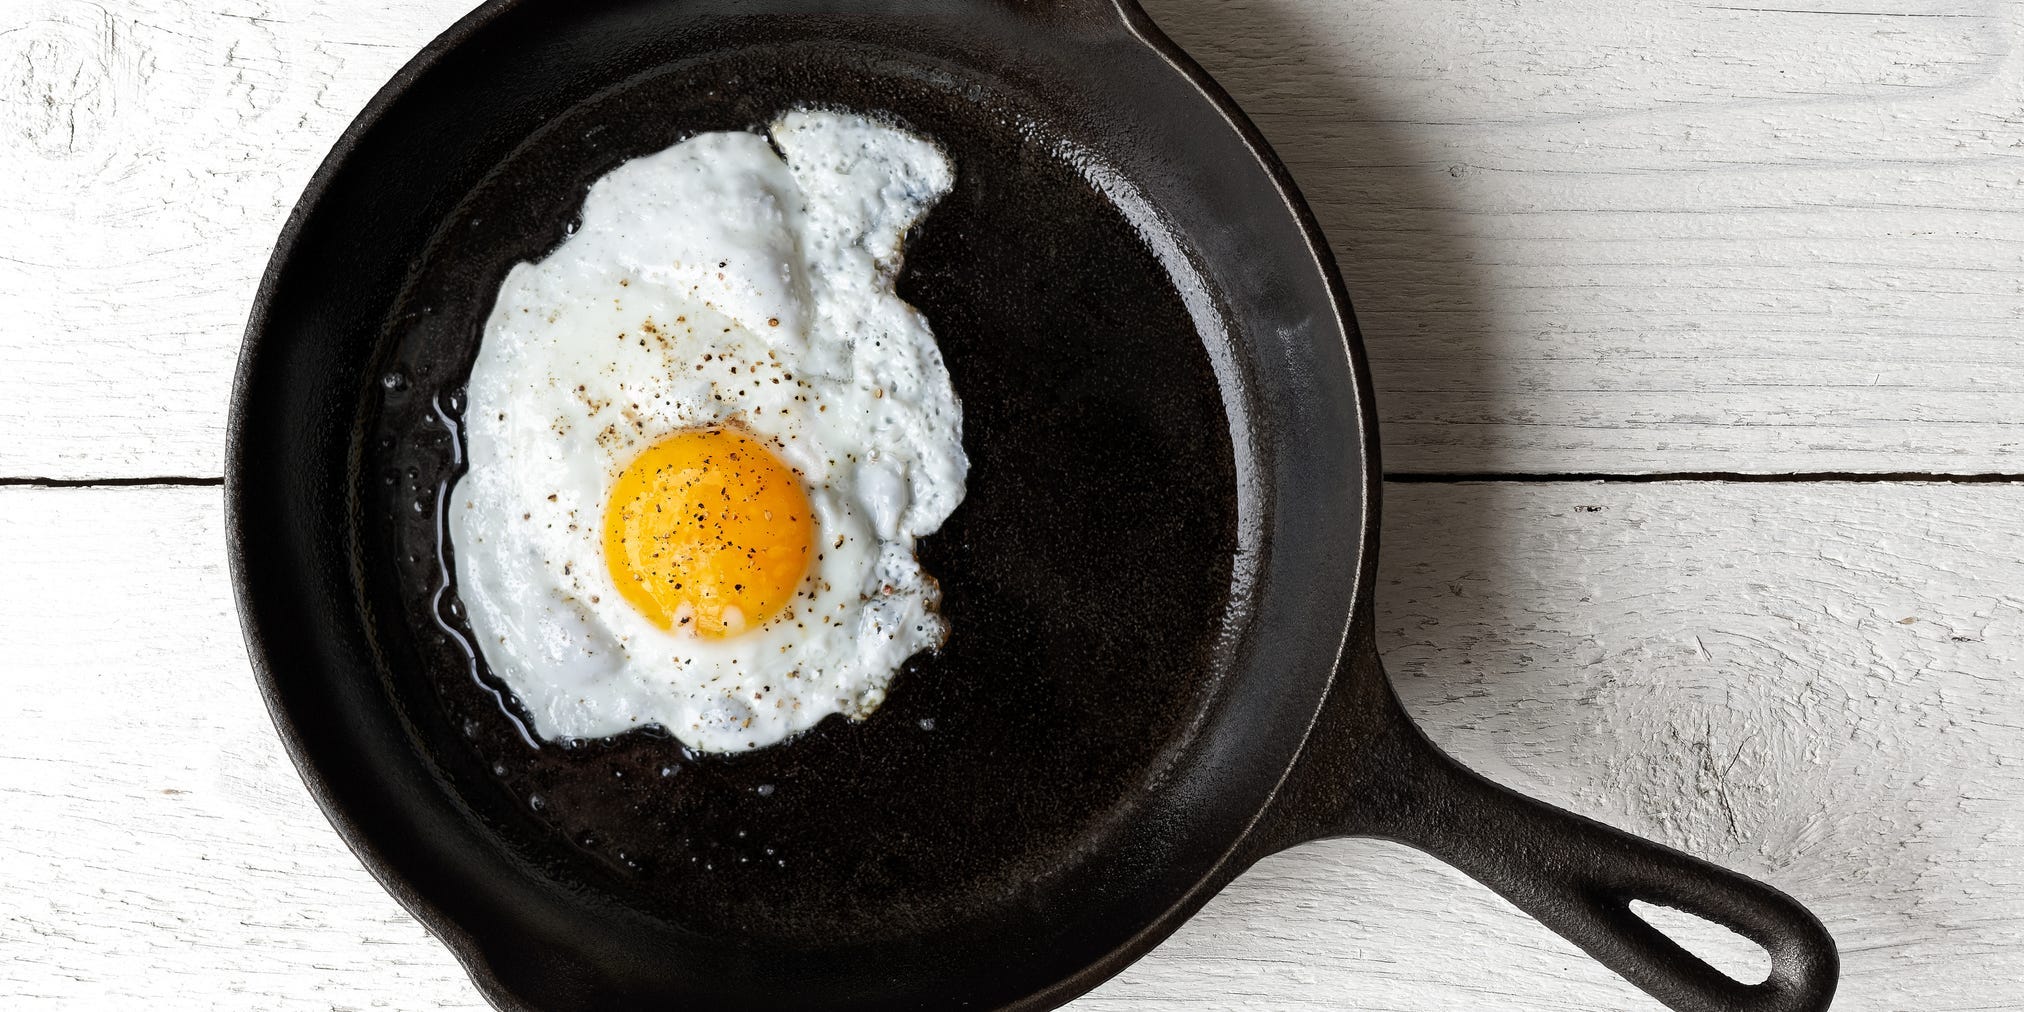 A fried egg in a cast iron skillet.